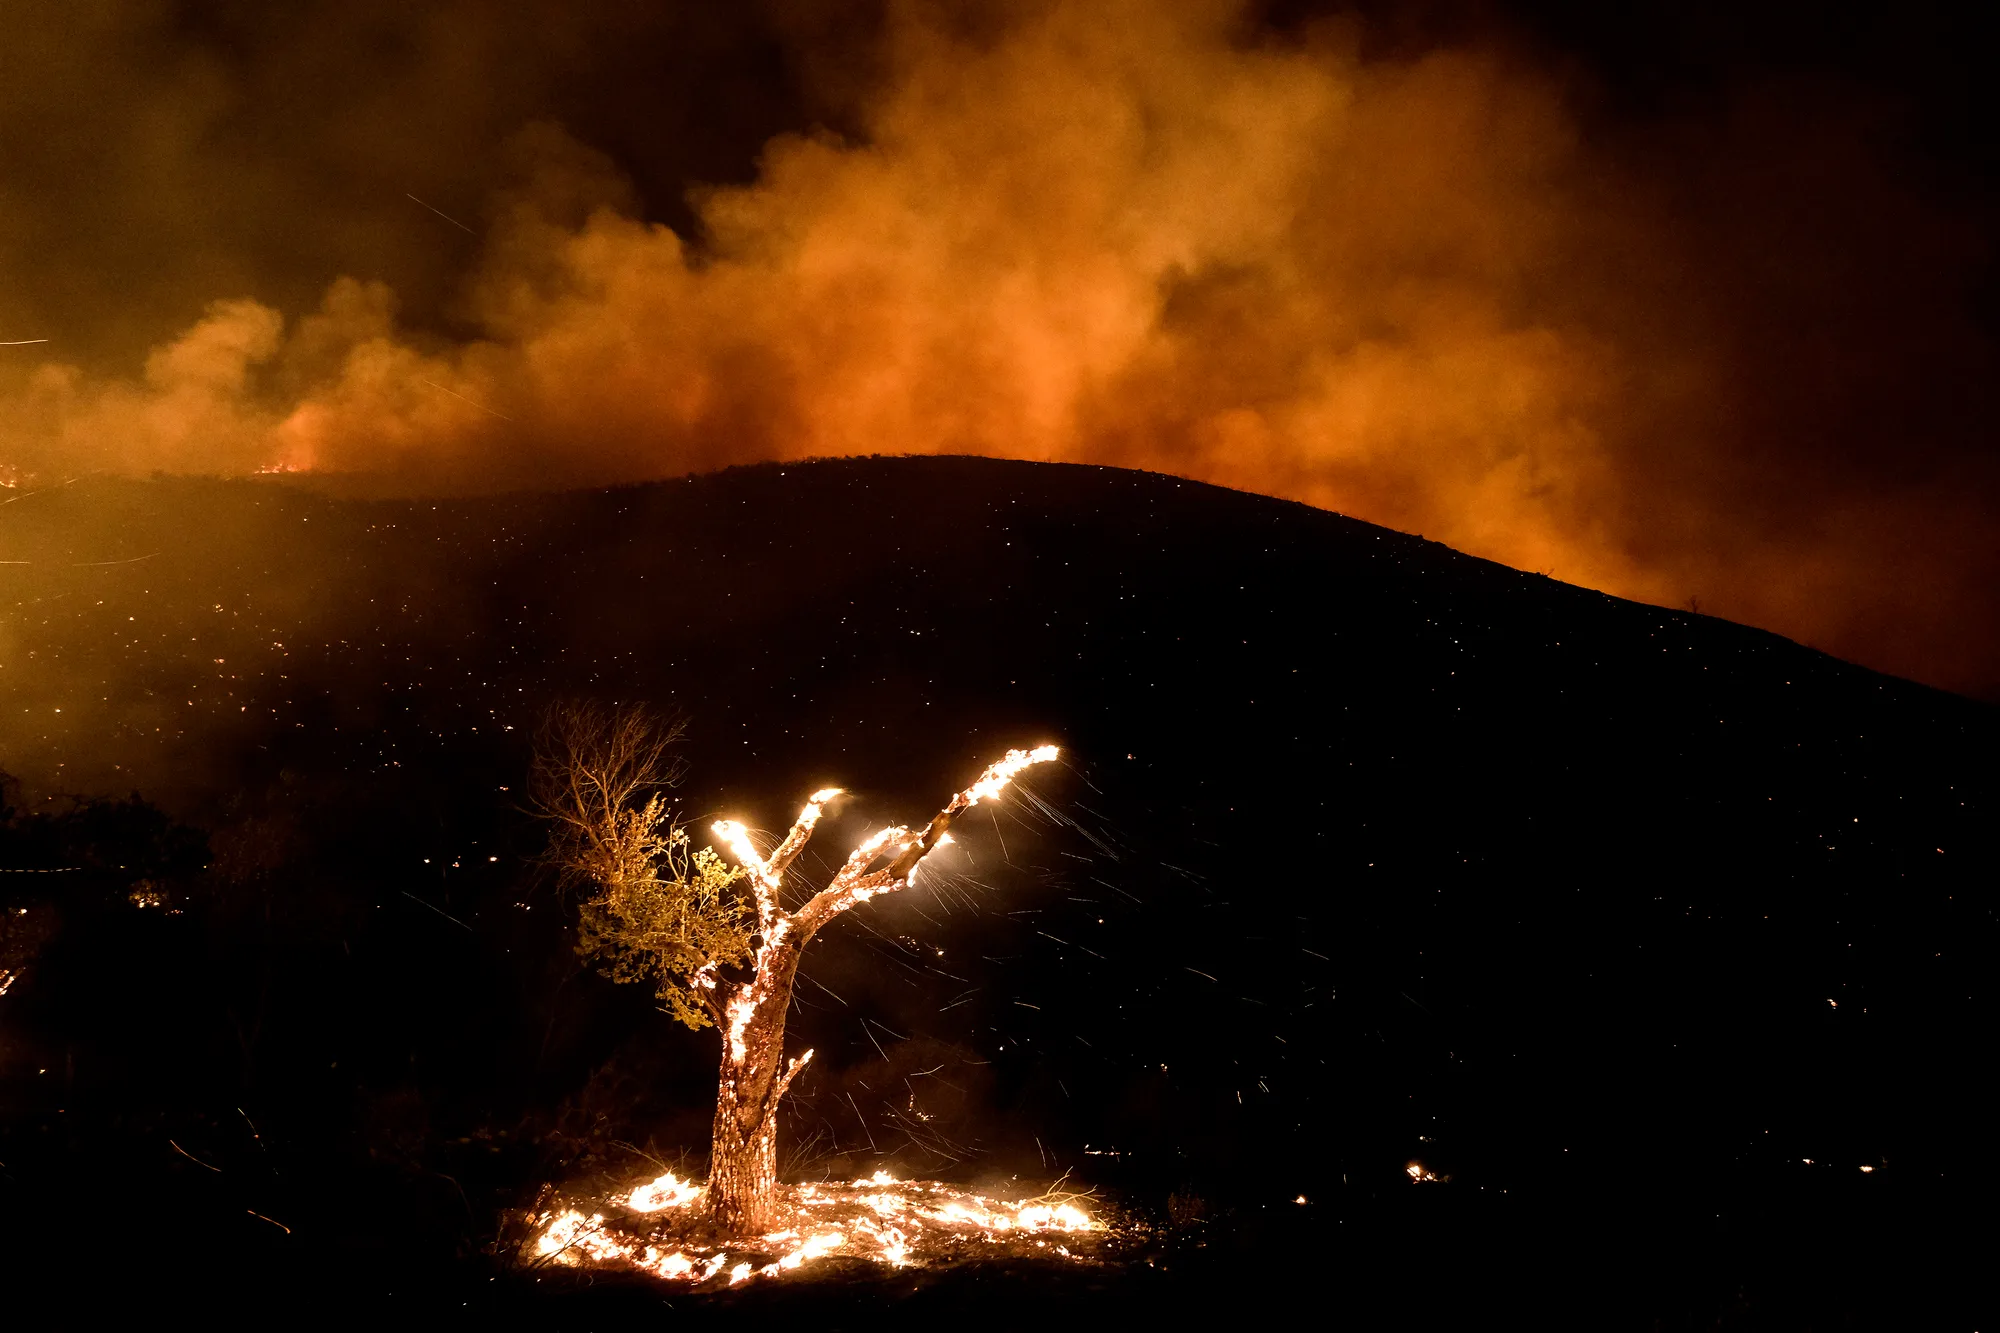 Wind whips embers from a burning tree during a wildfire near Hemet, California, on 6 September 2022. Photo: Ringo H.W. Chiu / AP Photo